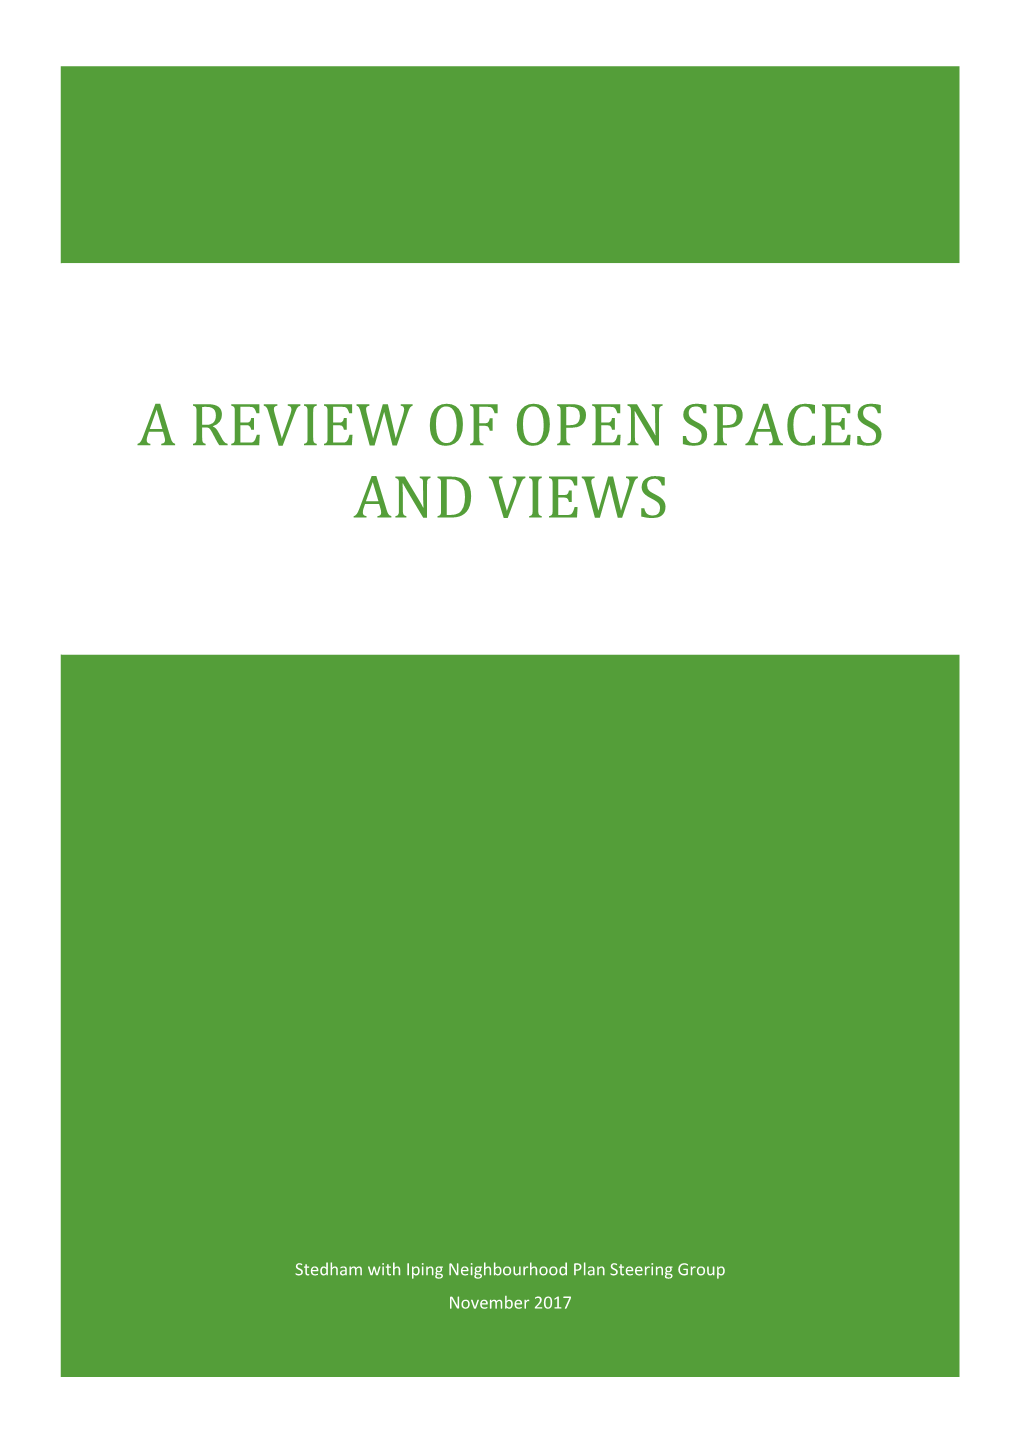 A Review of Open Spaces and Views